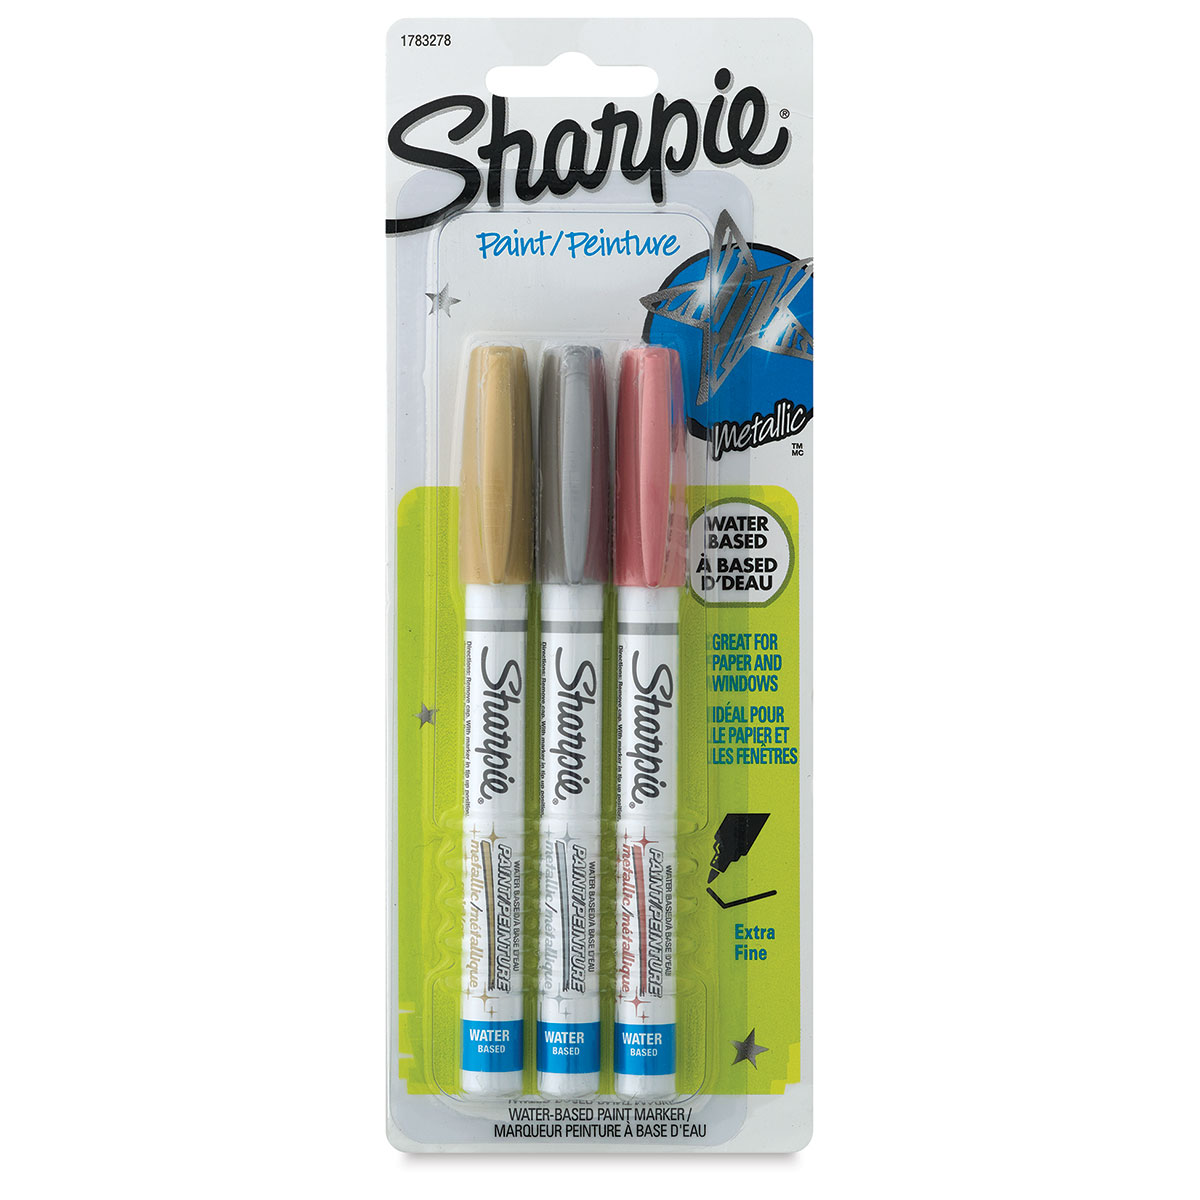 Sharpie 1783278 Water-Based Metallic Paint Markers, Extra Fine